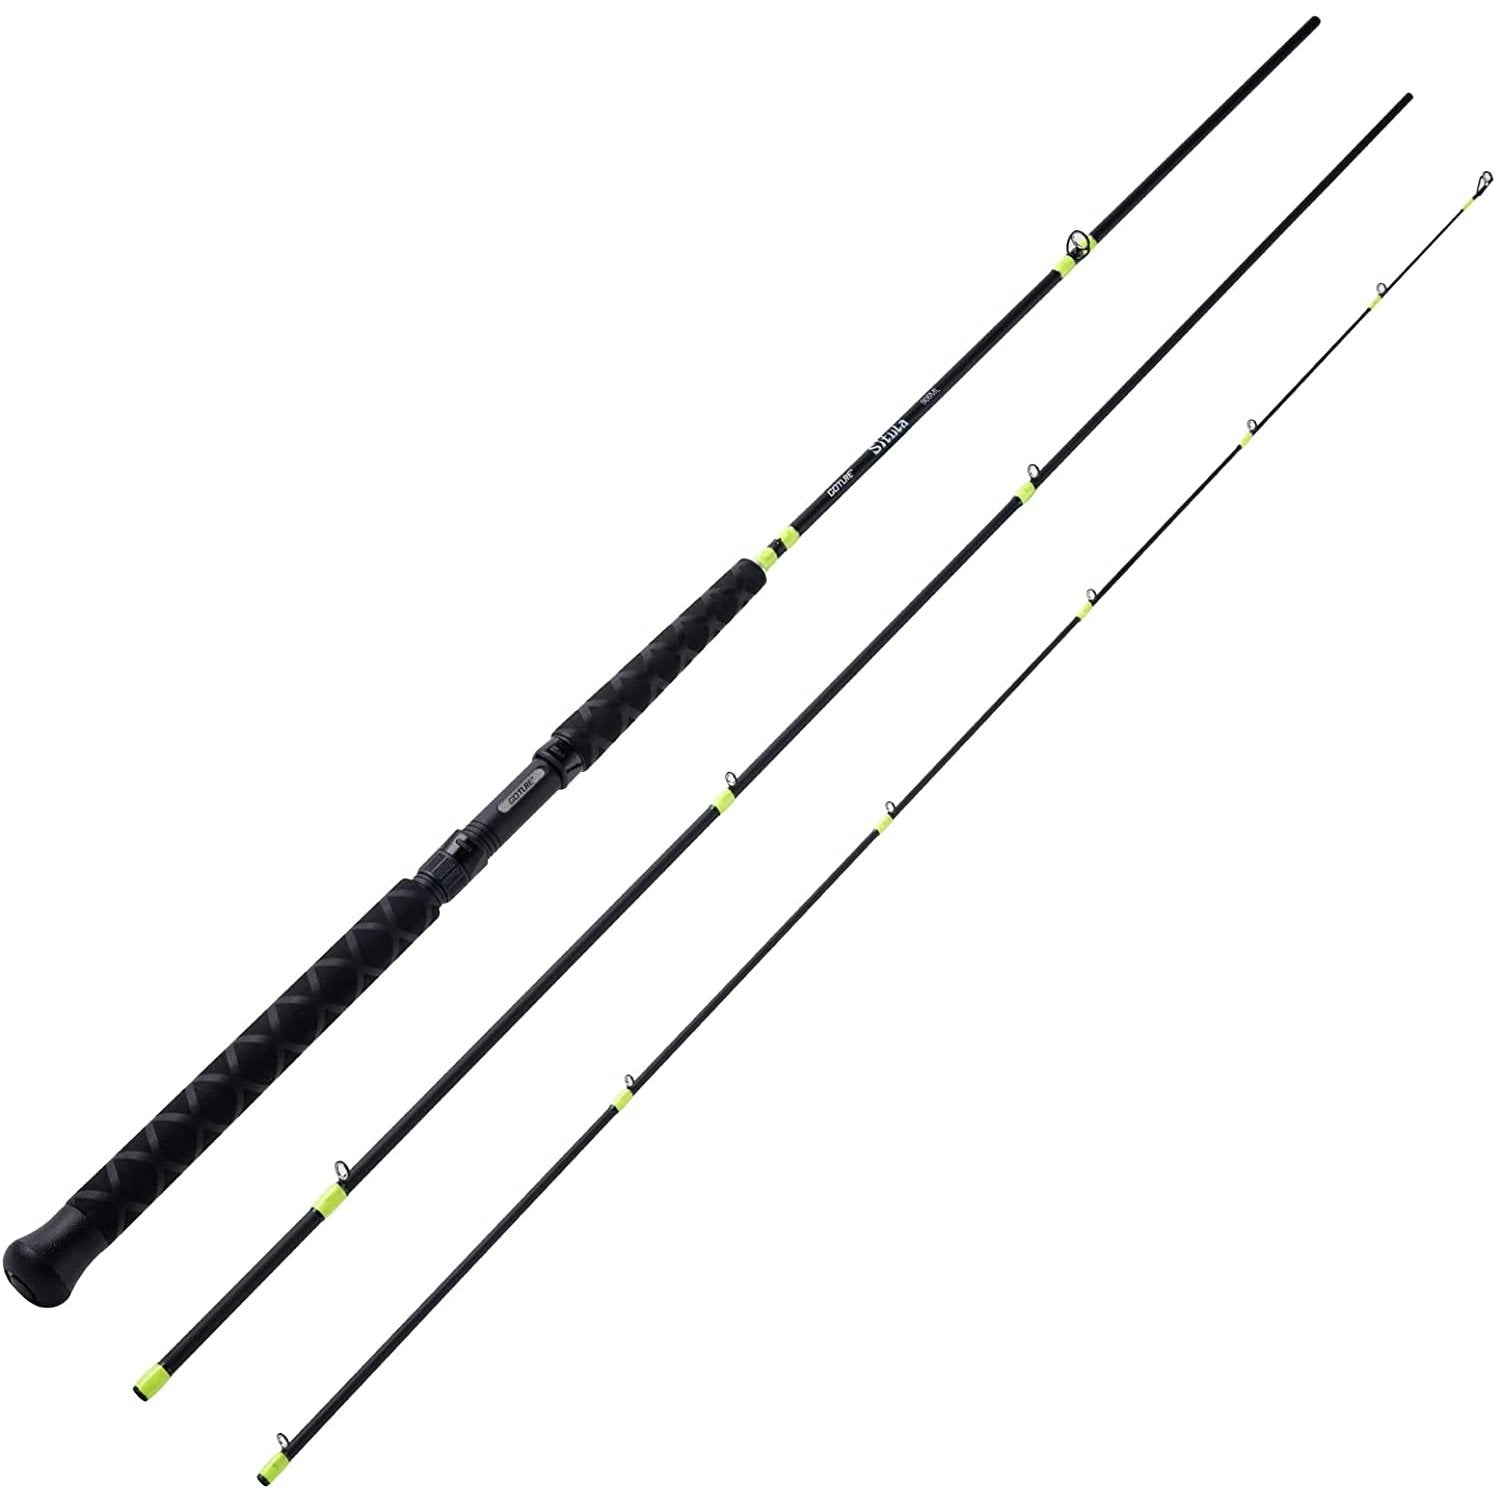 Goture Fly Fishing Rod and Reel Combo Starter Kit